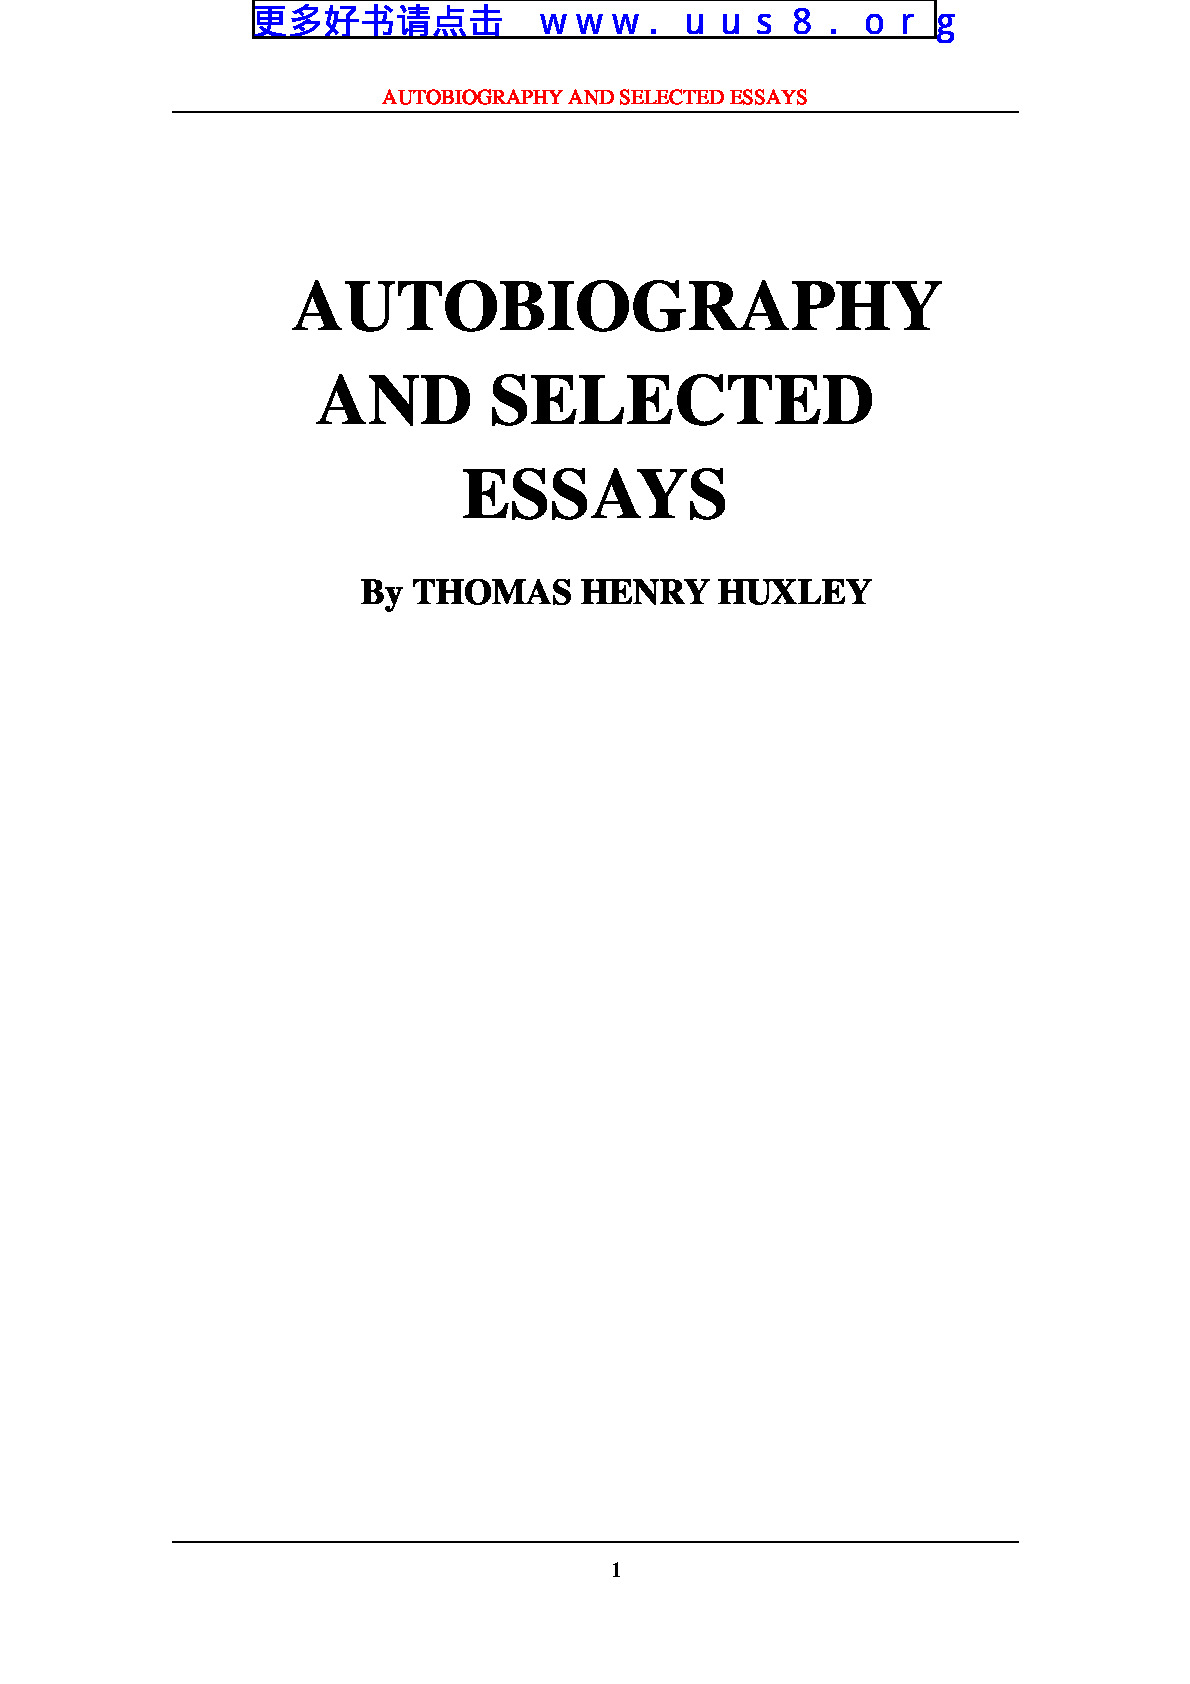 AUTOBIOGRAPHY_AND_SELECTED_ESSAYS(自传和散文选)